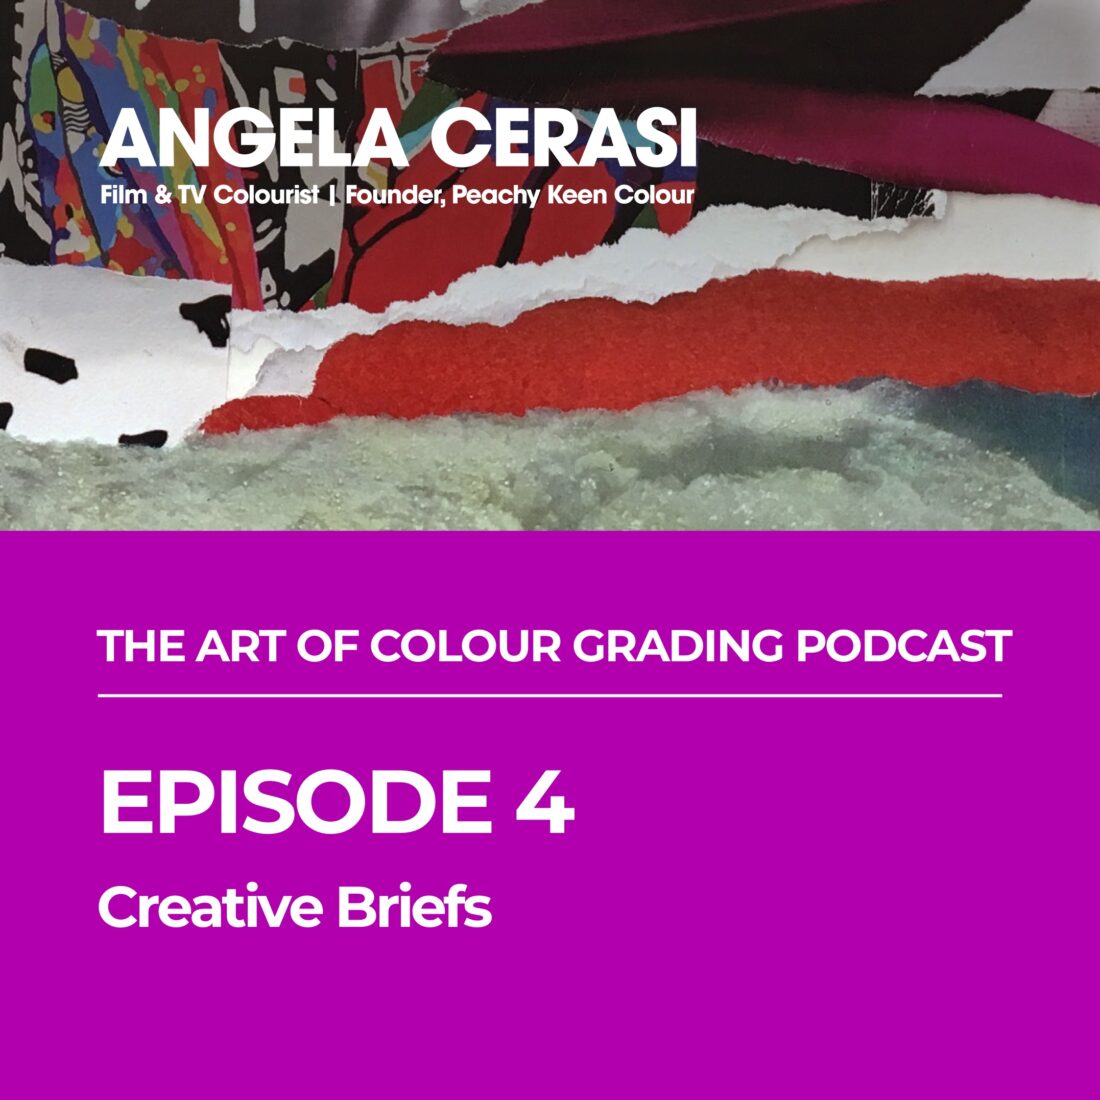 Colourist Angela Cerasi's podcast episode about giving the best creative brief